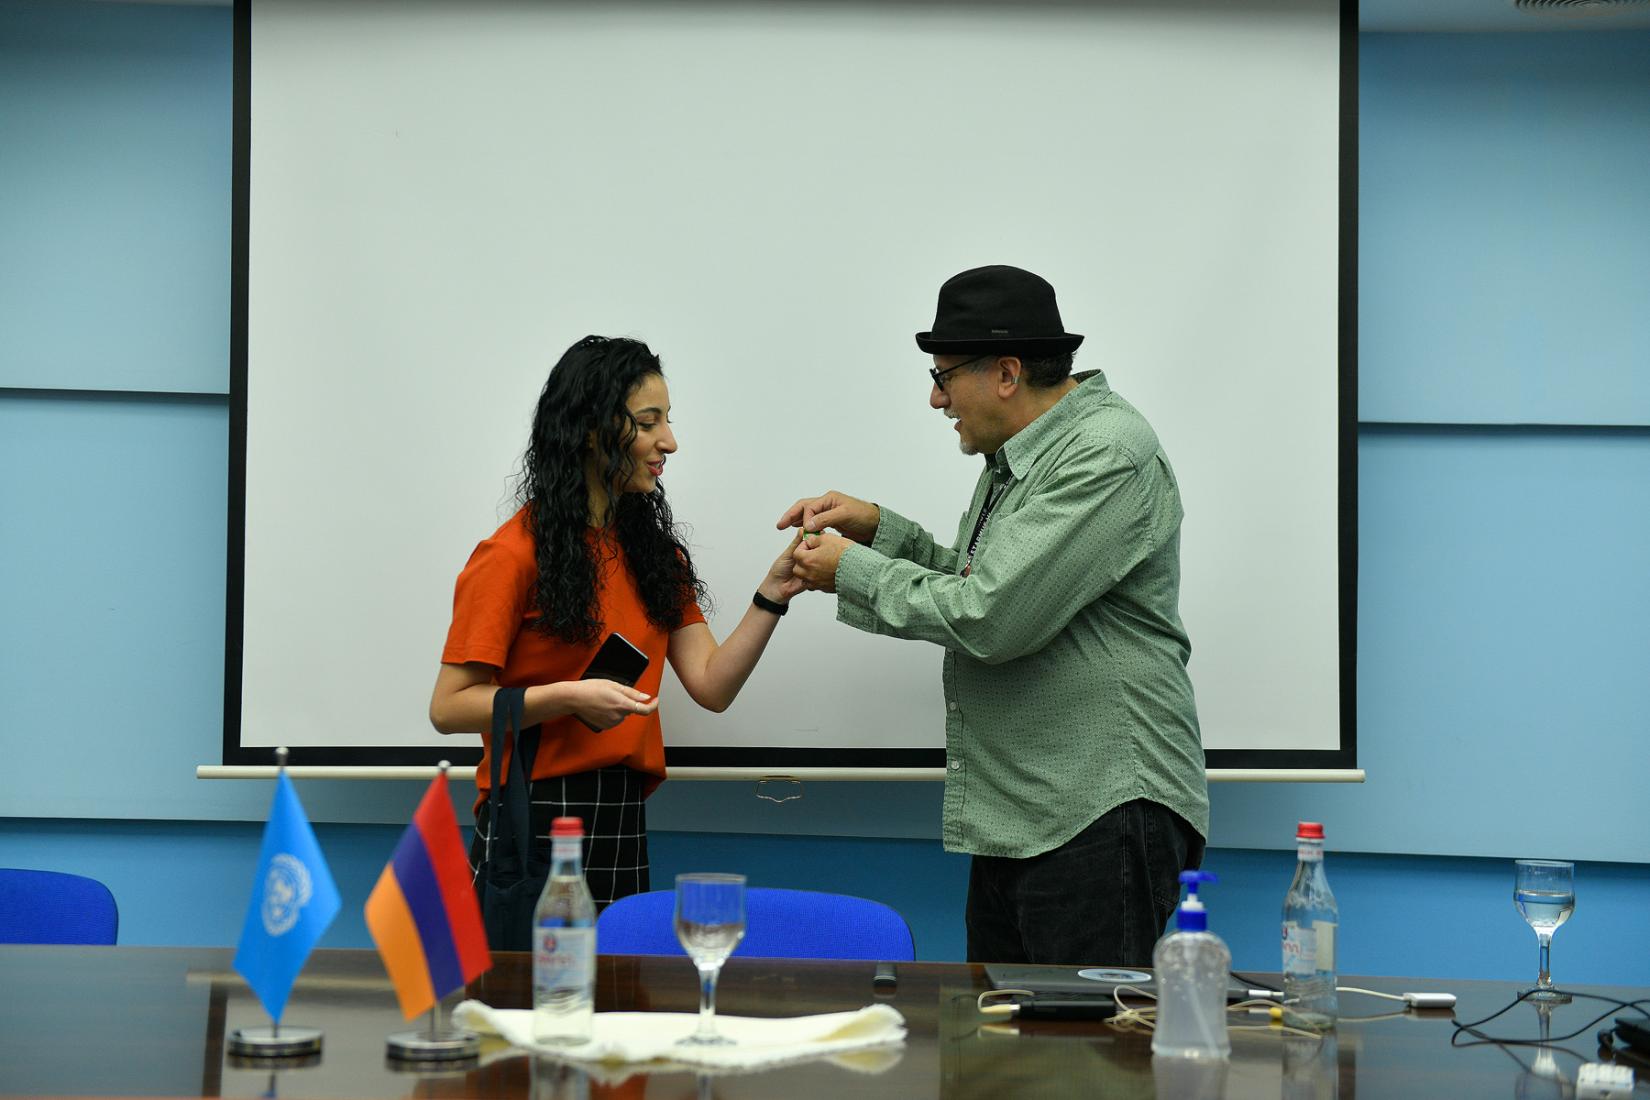 A man receives a symbolic gift from the UN Armenia Natioinal Information Officer Ms. Armine Petrosyan.